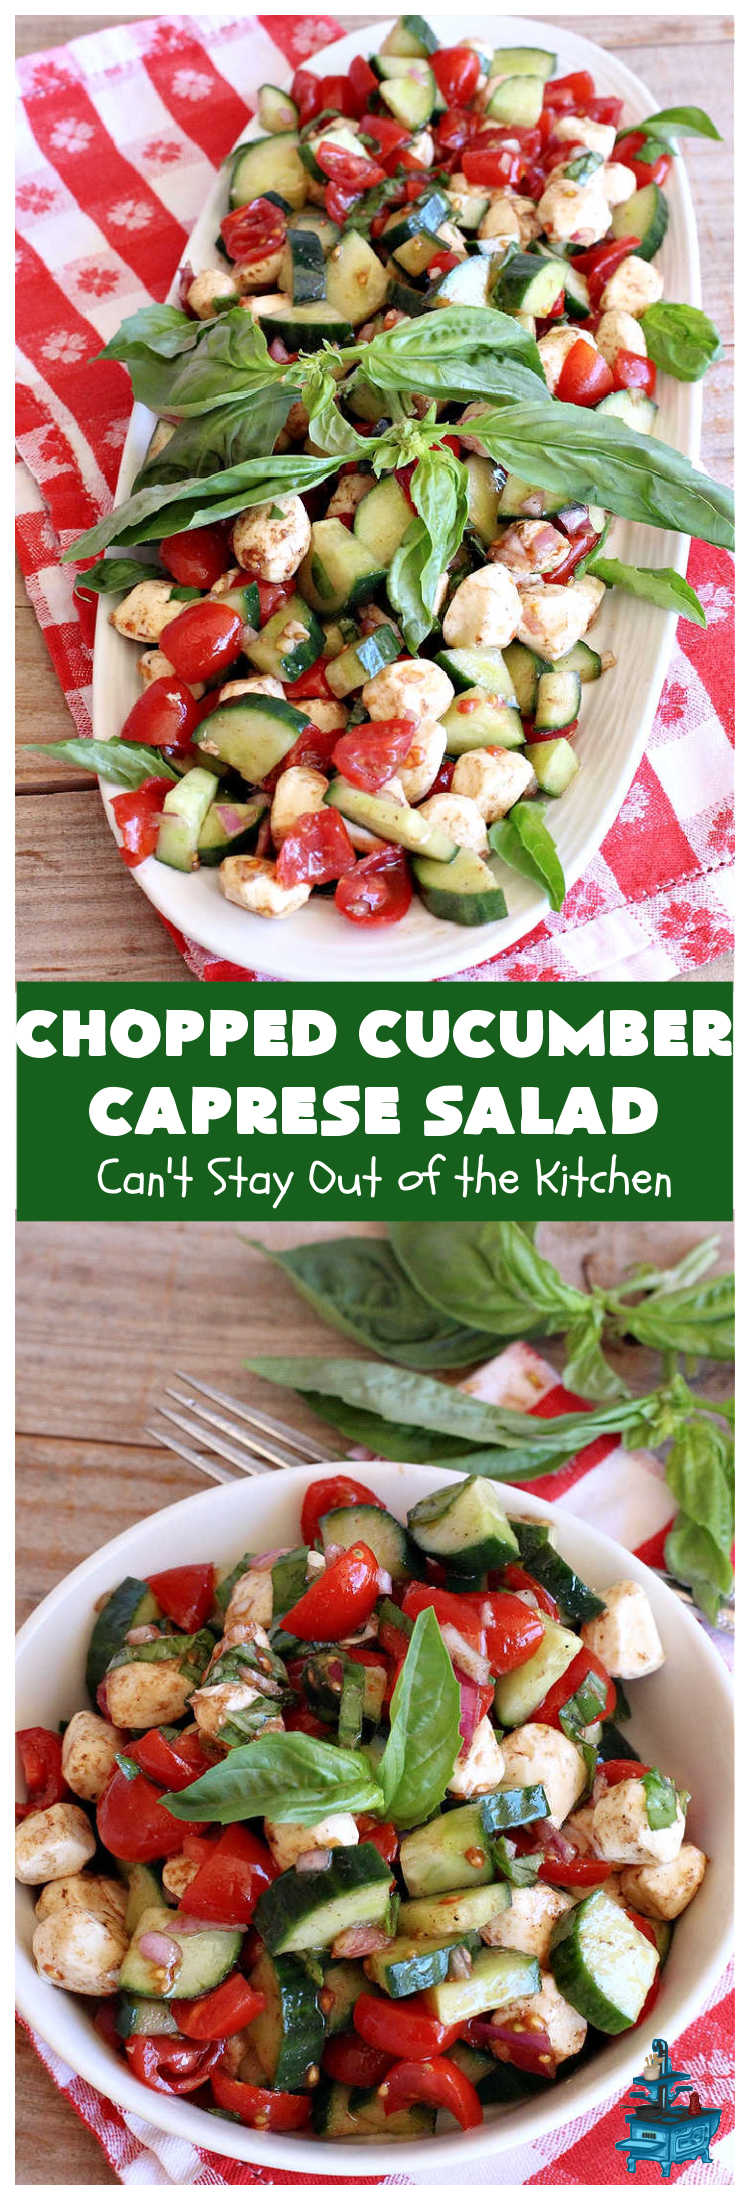 Chopped Cucumber Caprese Salad | Can't Stay Out of the Kitchen